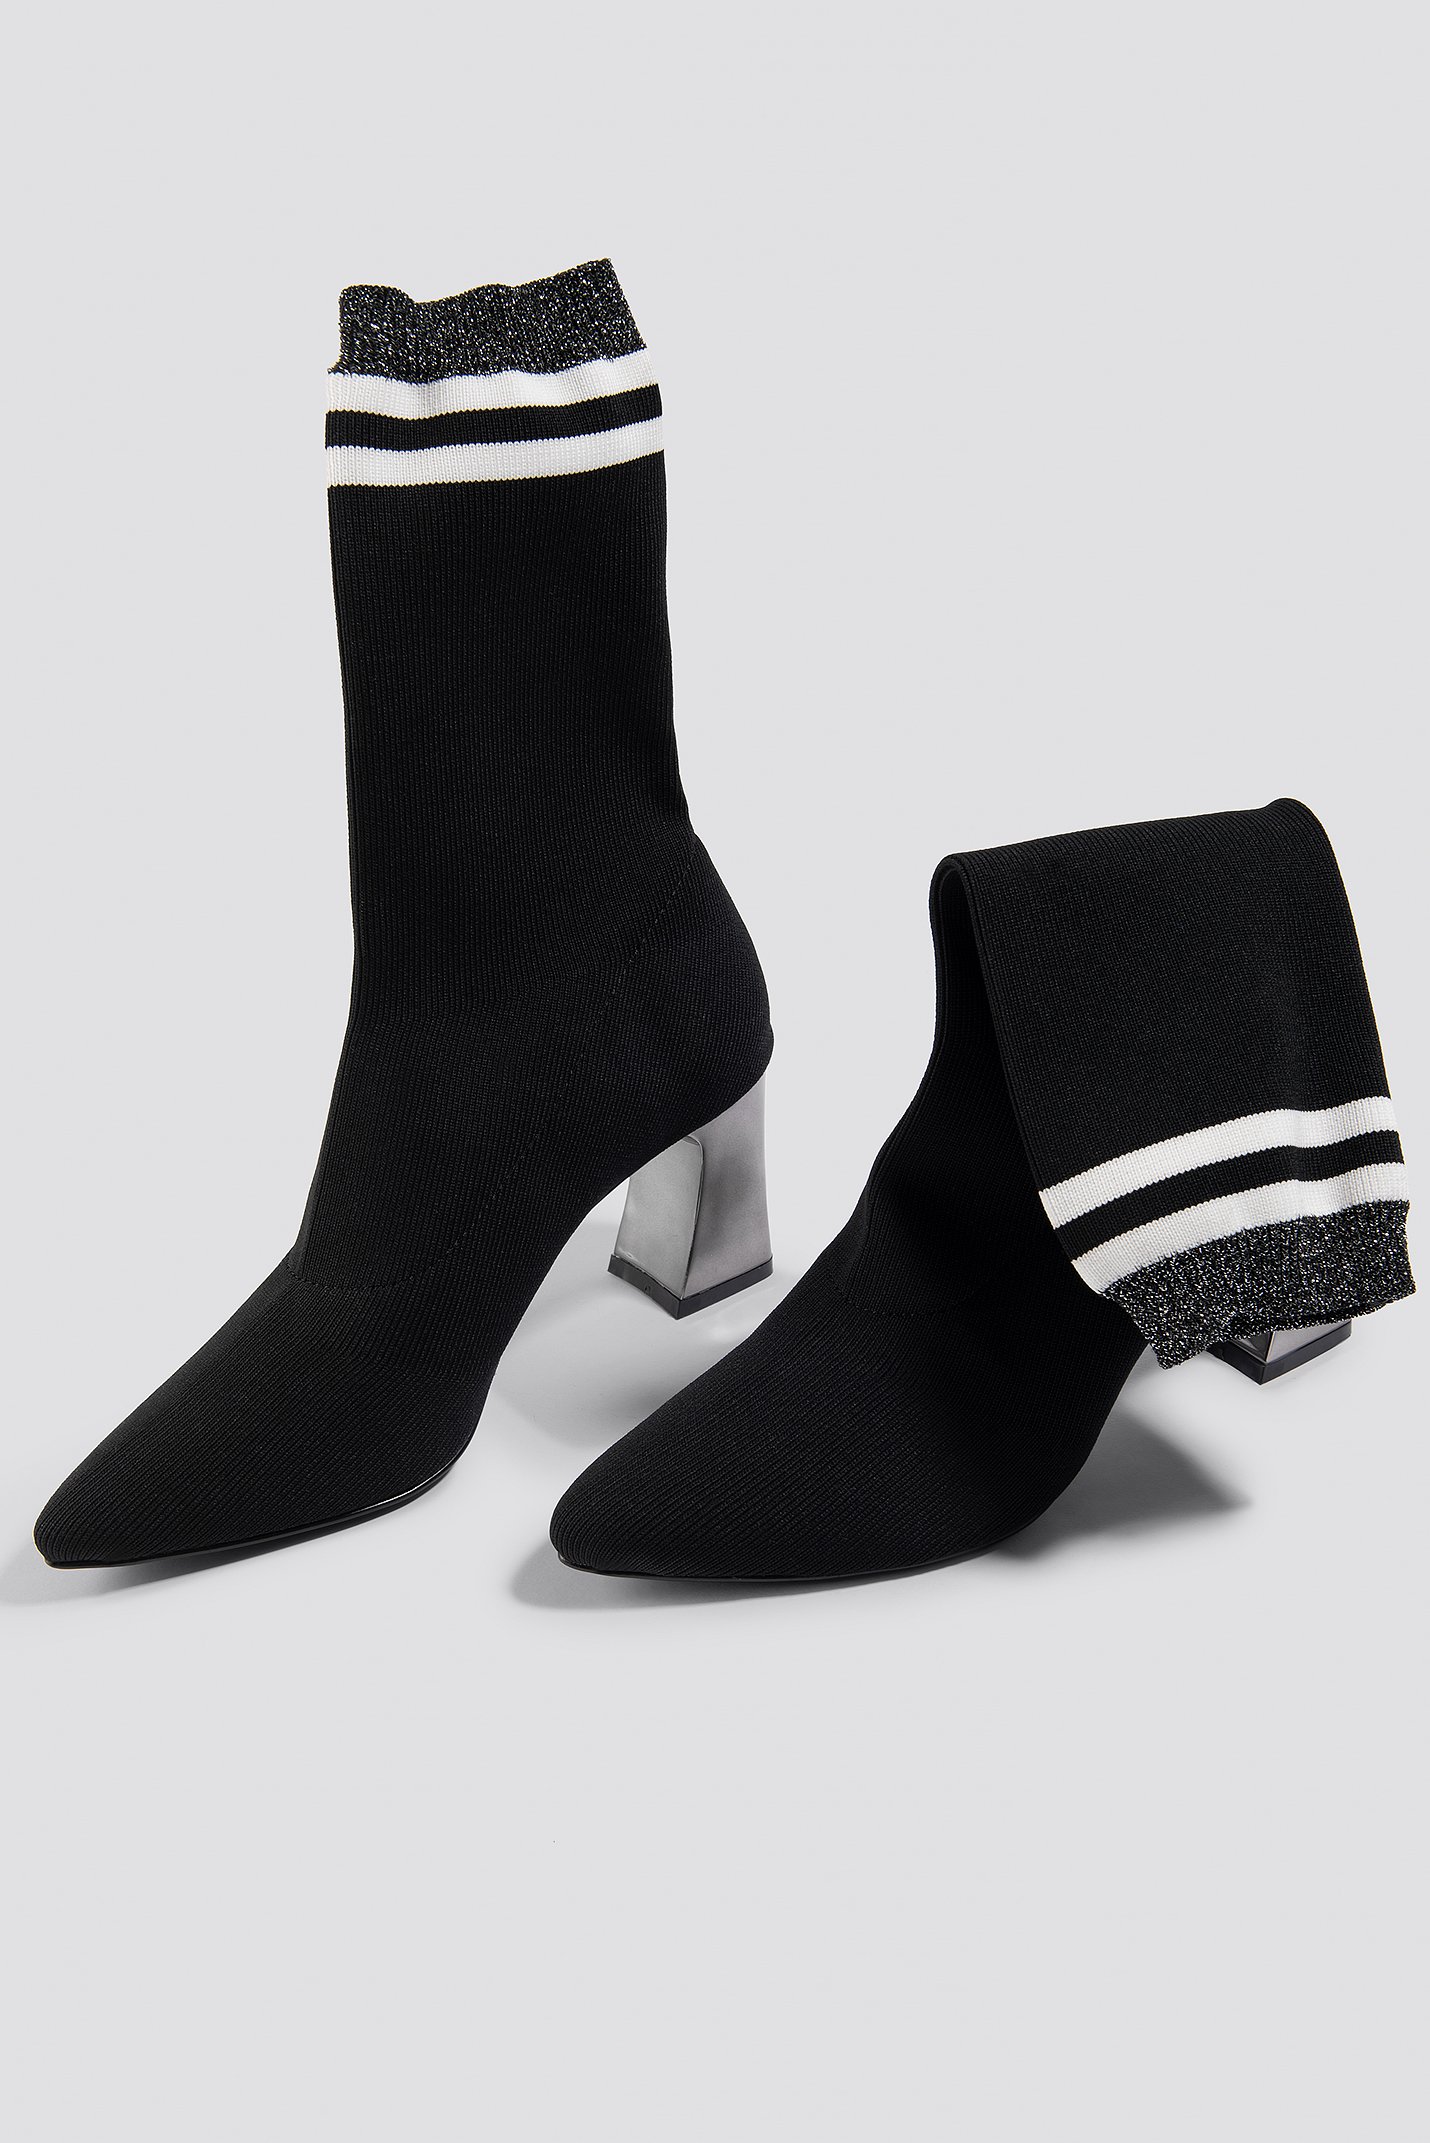 black and white sock boots